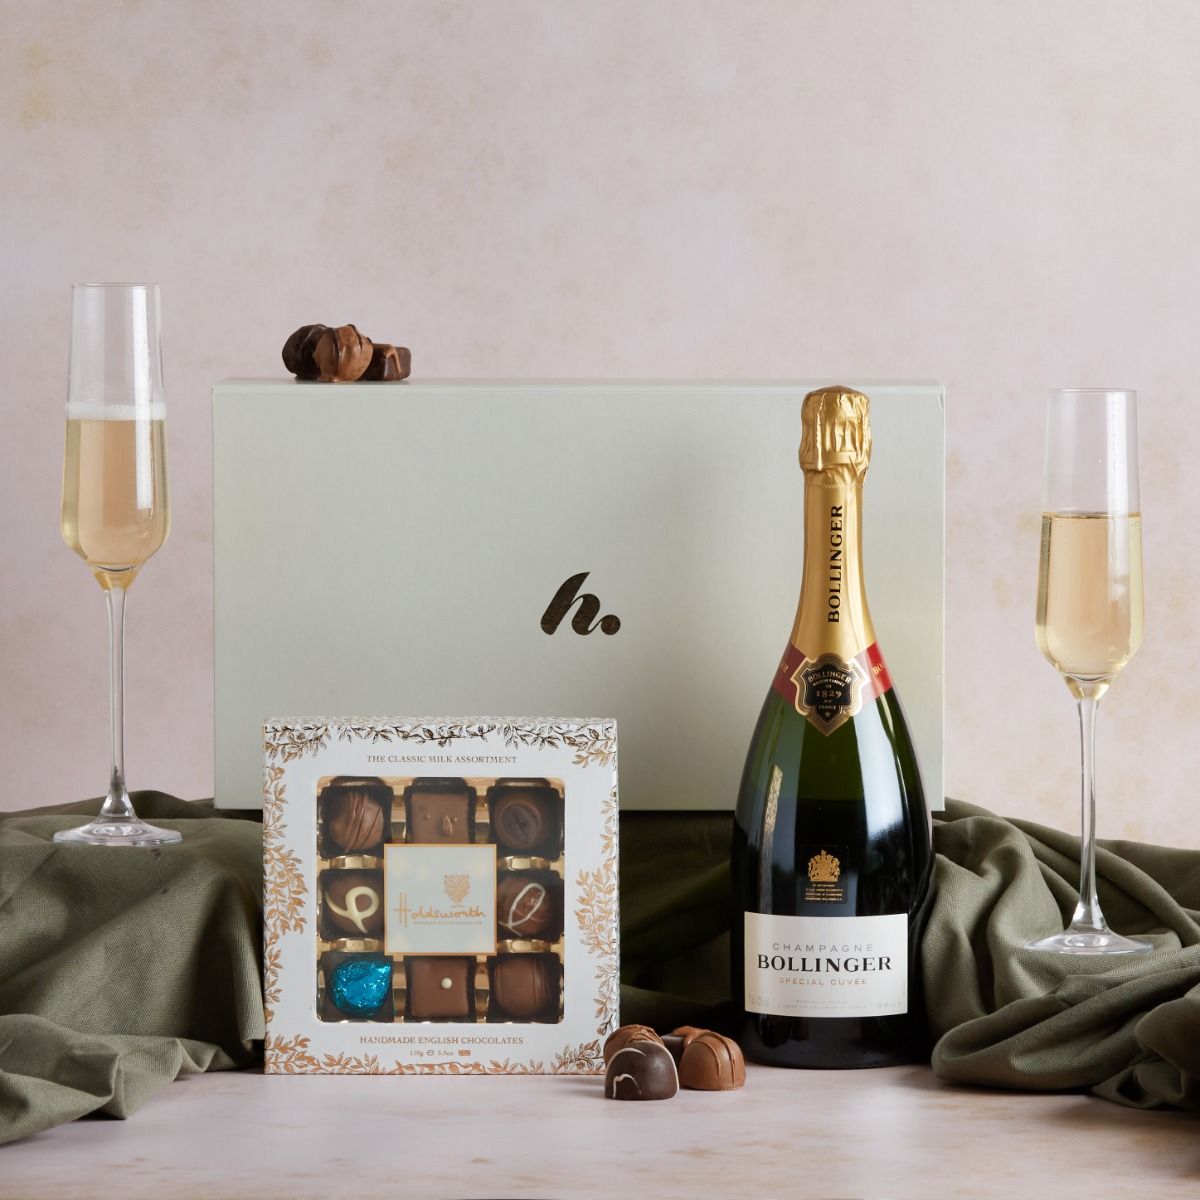 Bollinger Champagne & Chocolates gift box with flutes and contents on display